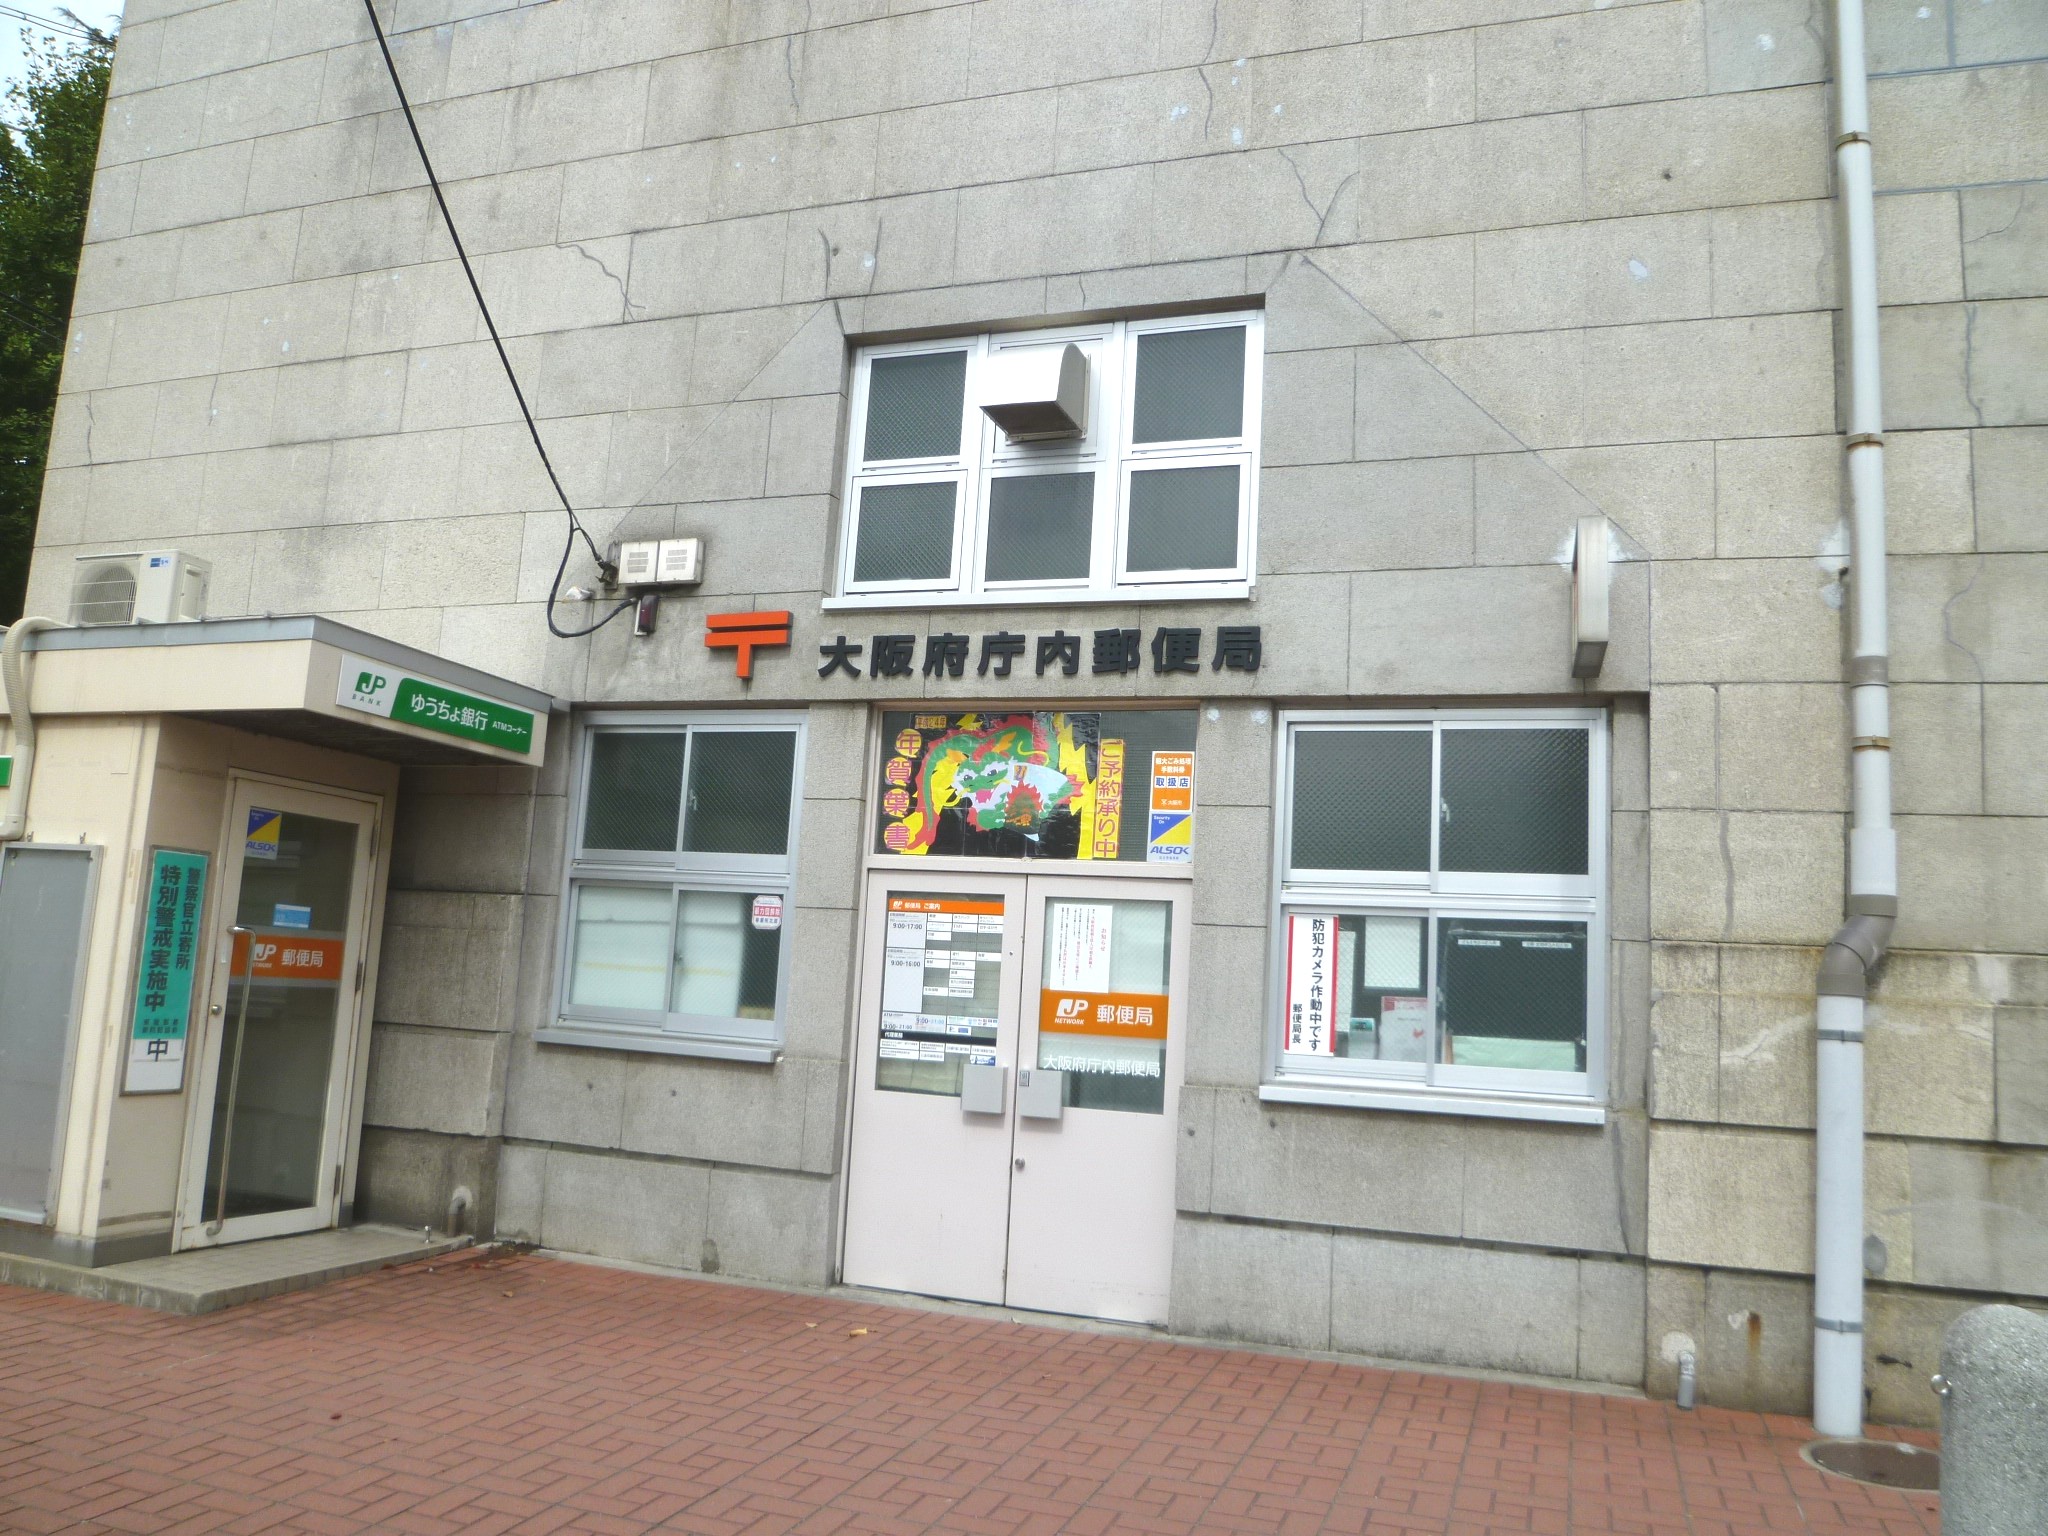 post office. 1040m to Osaka Prefectural Government in the post office (post office)